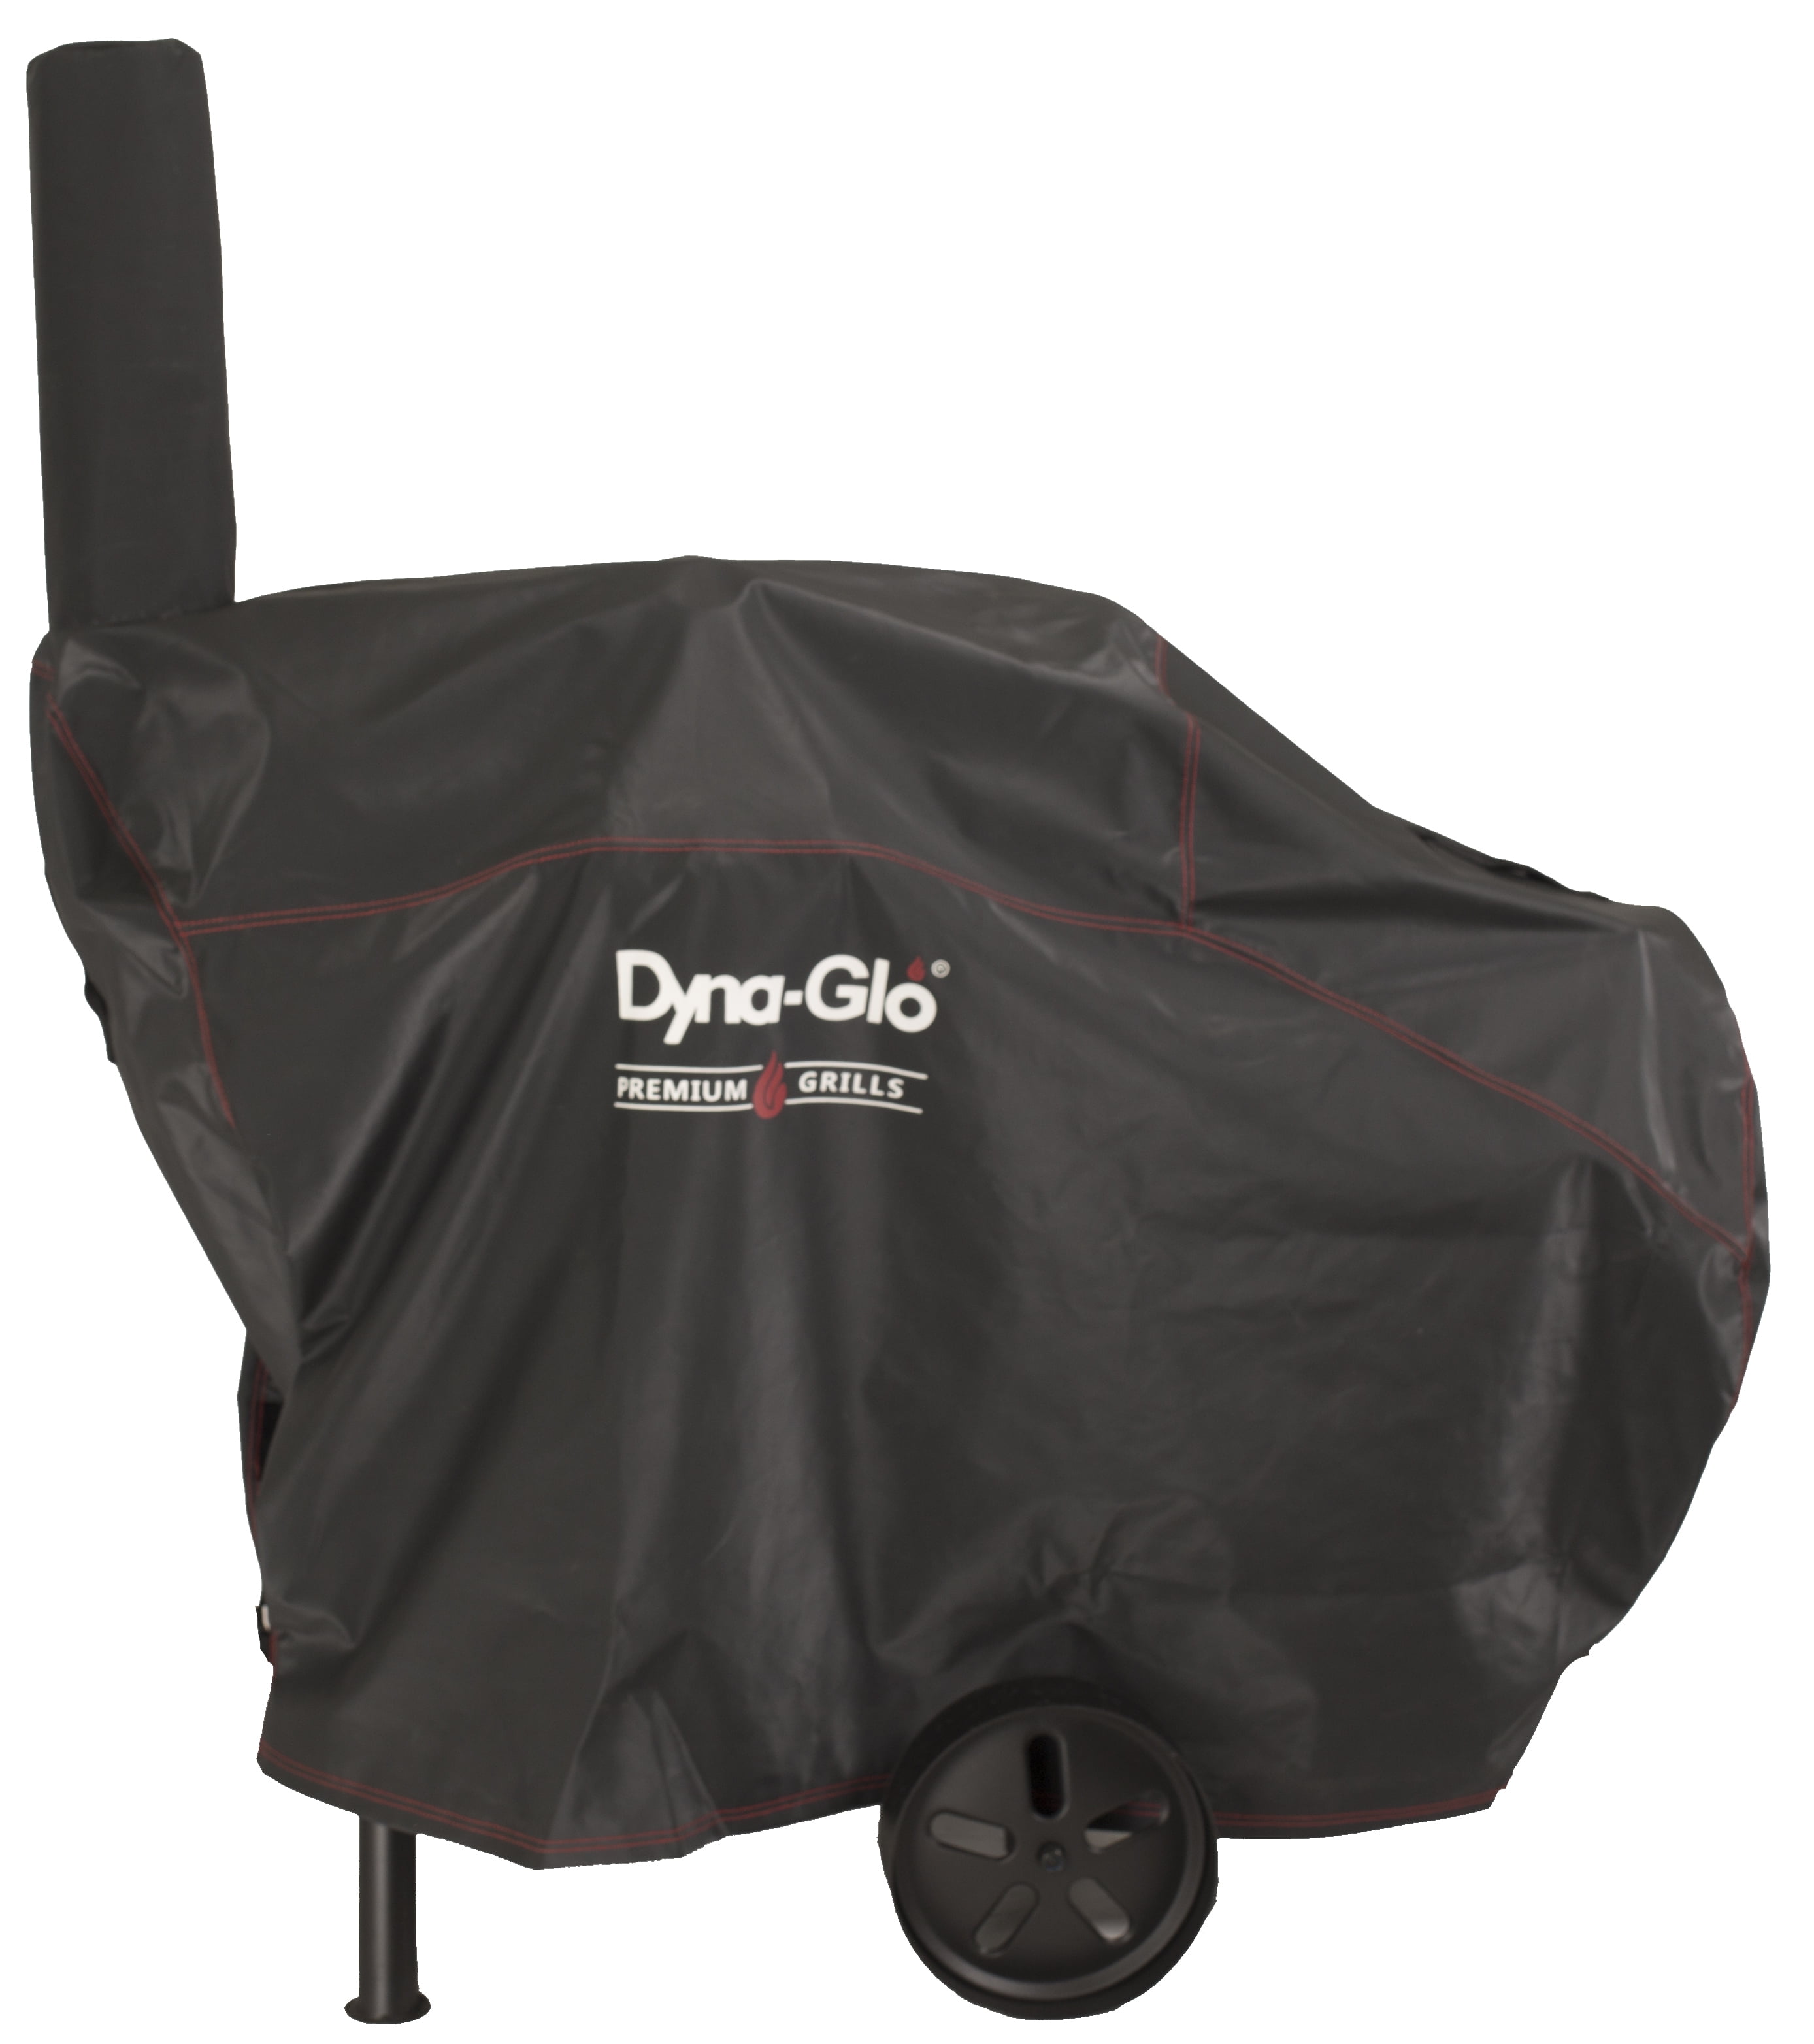 Dyna-Glo DG576CC 62in Wide Charcoal Grill Cover Black 